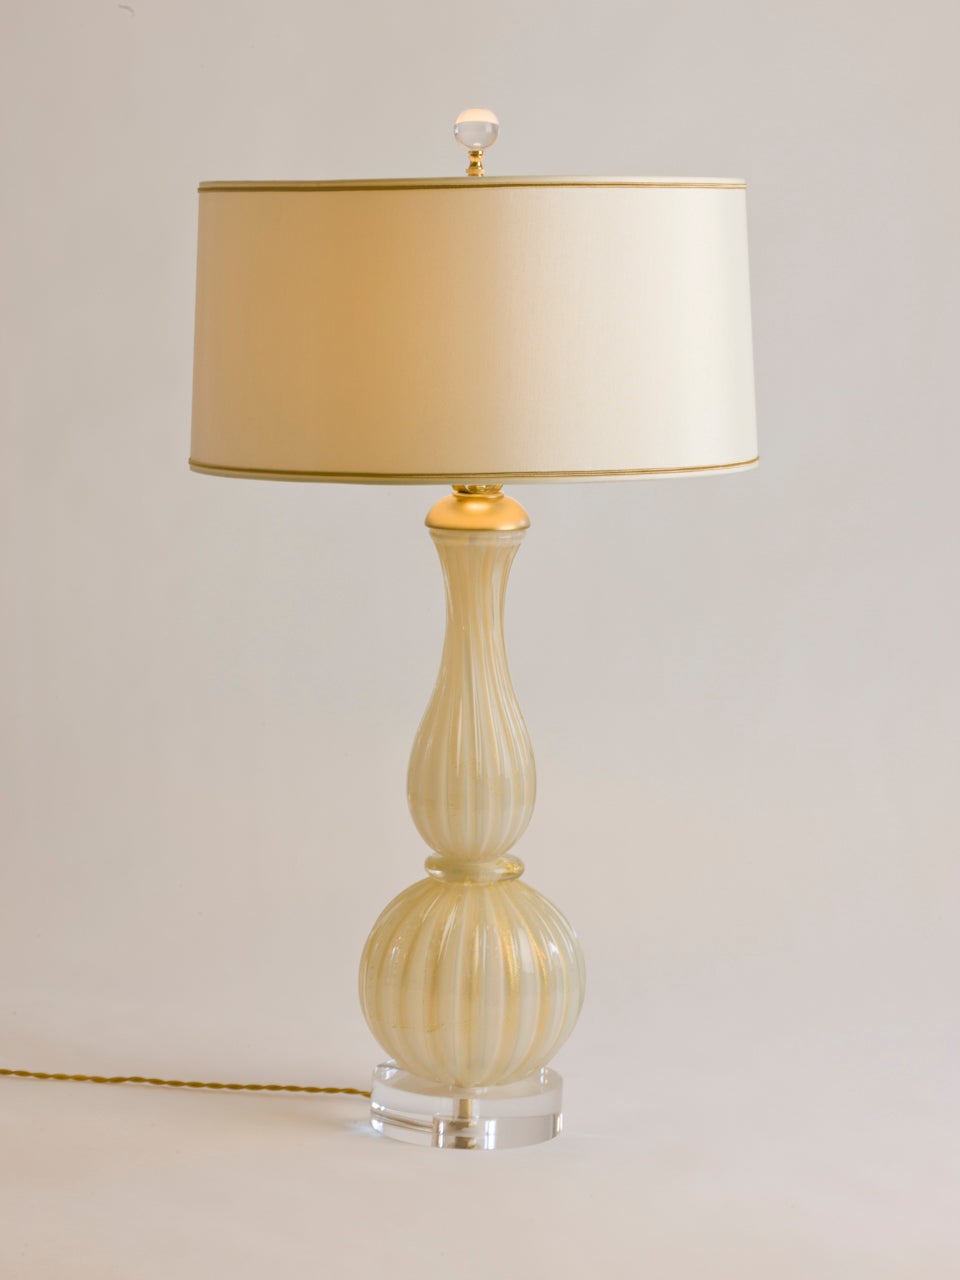 Vintage Cream and Gold Murano Lamp